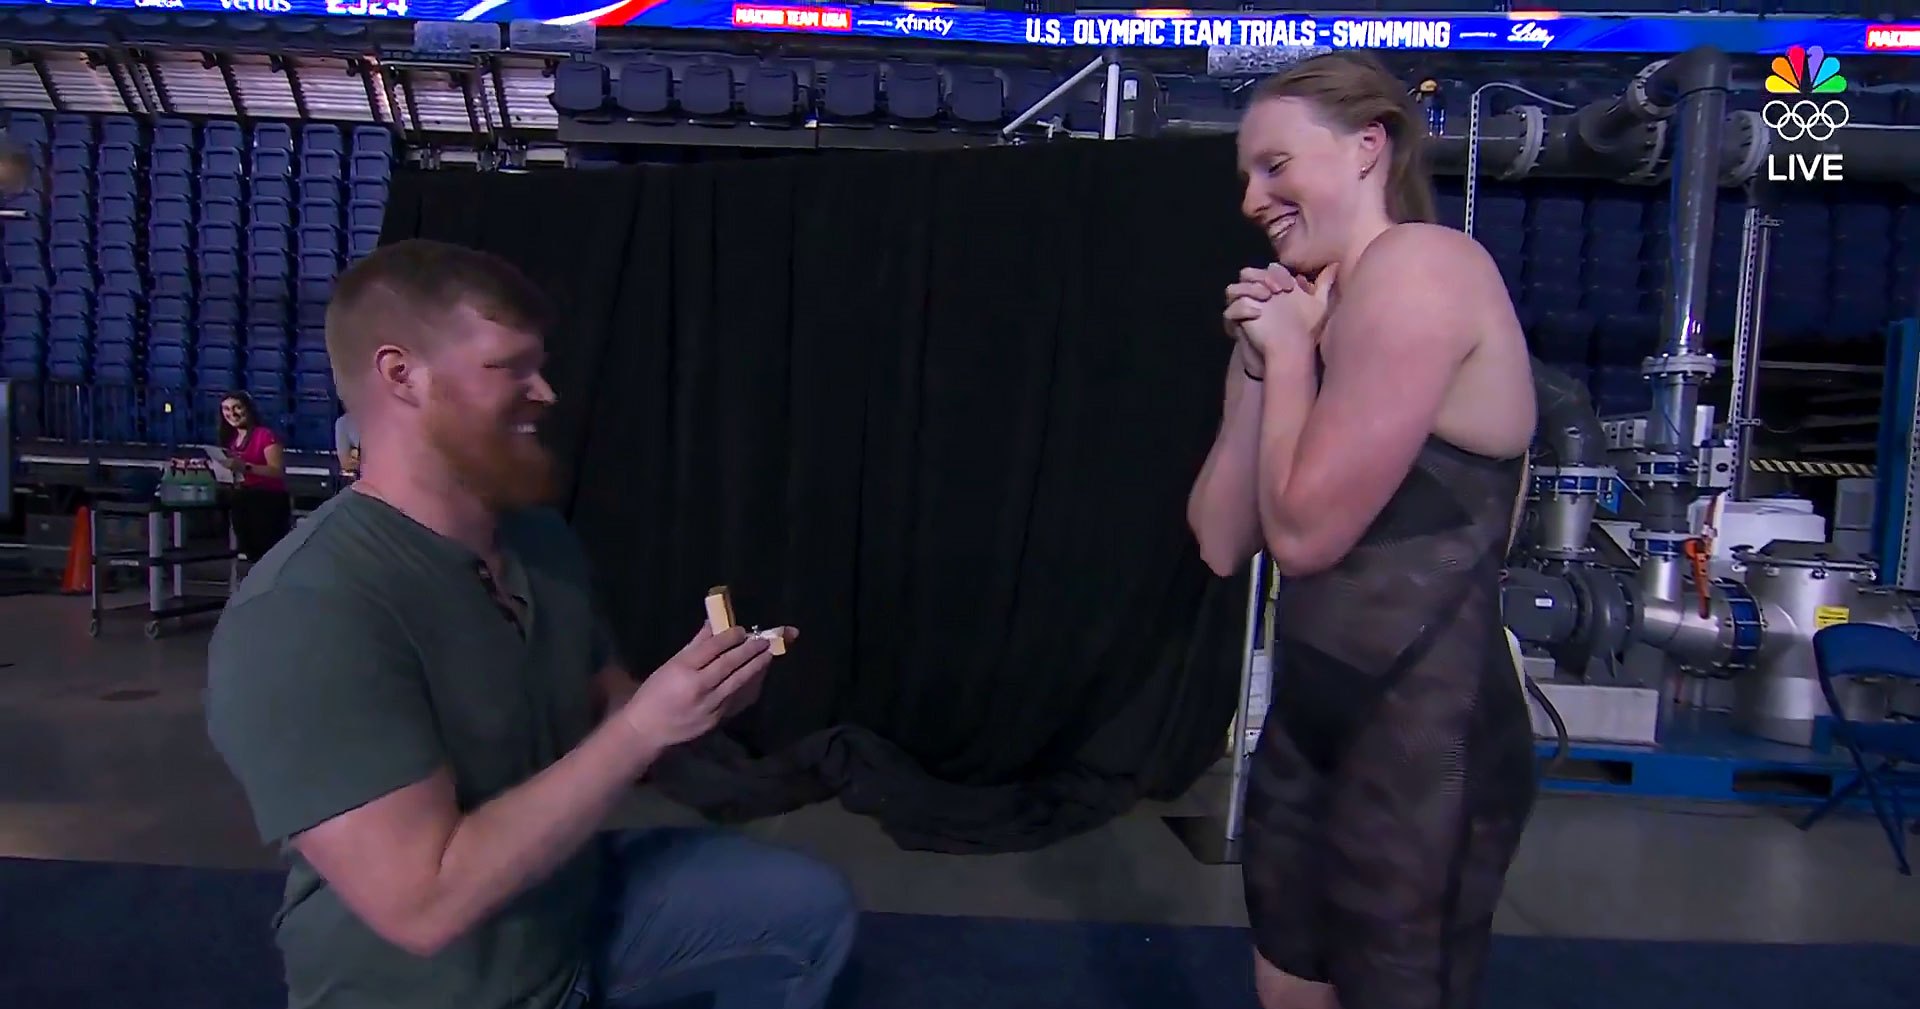 Swimmer Lilly King's Surprise Engagement After Olympic Trials Sparks Joy